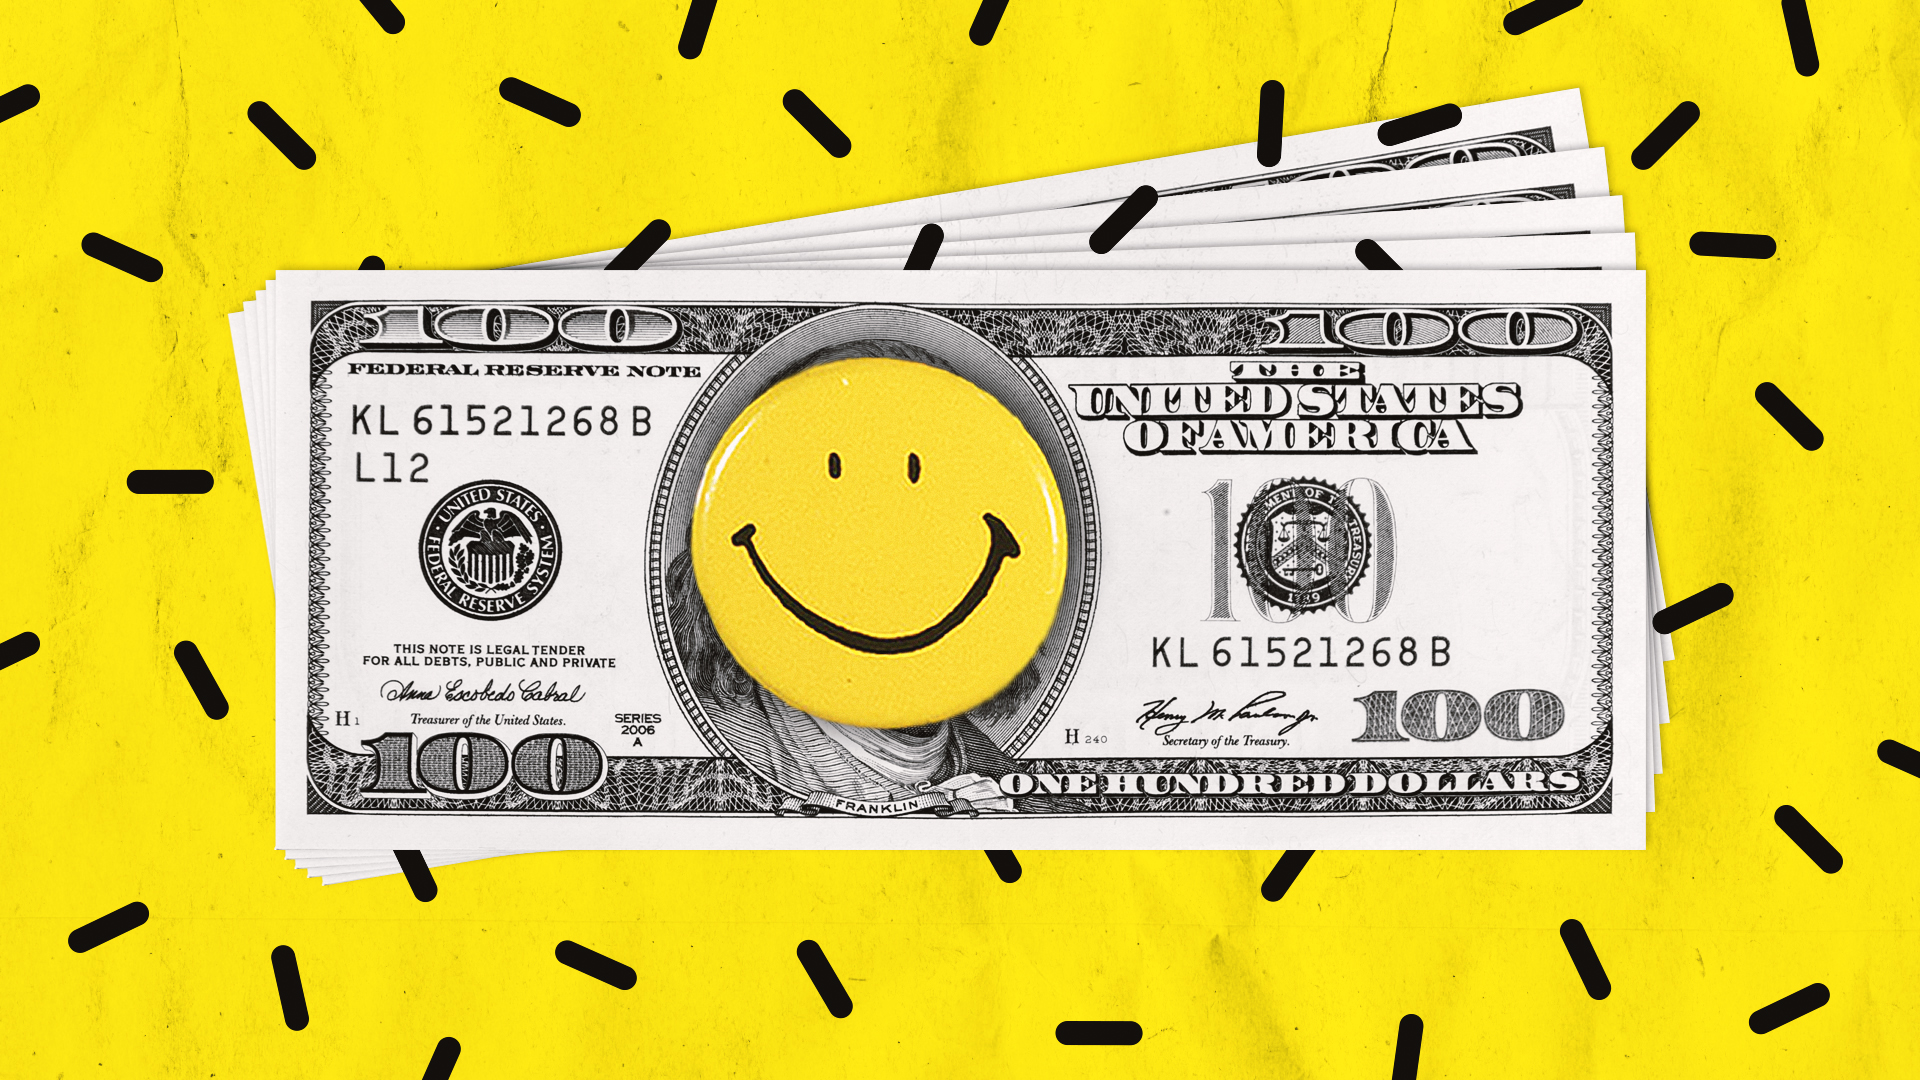 Illustration of a stack of one hundred dollar bills with a yellow smiley face pin over the portrait of Benjamin Franklin.